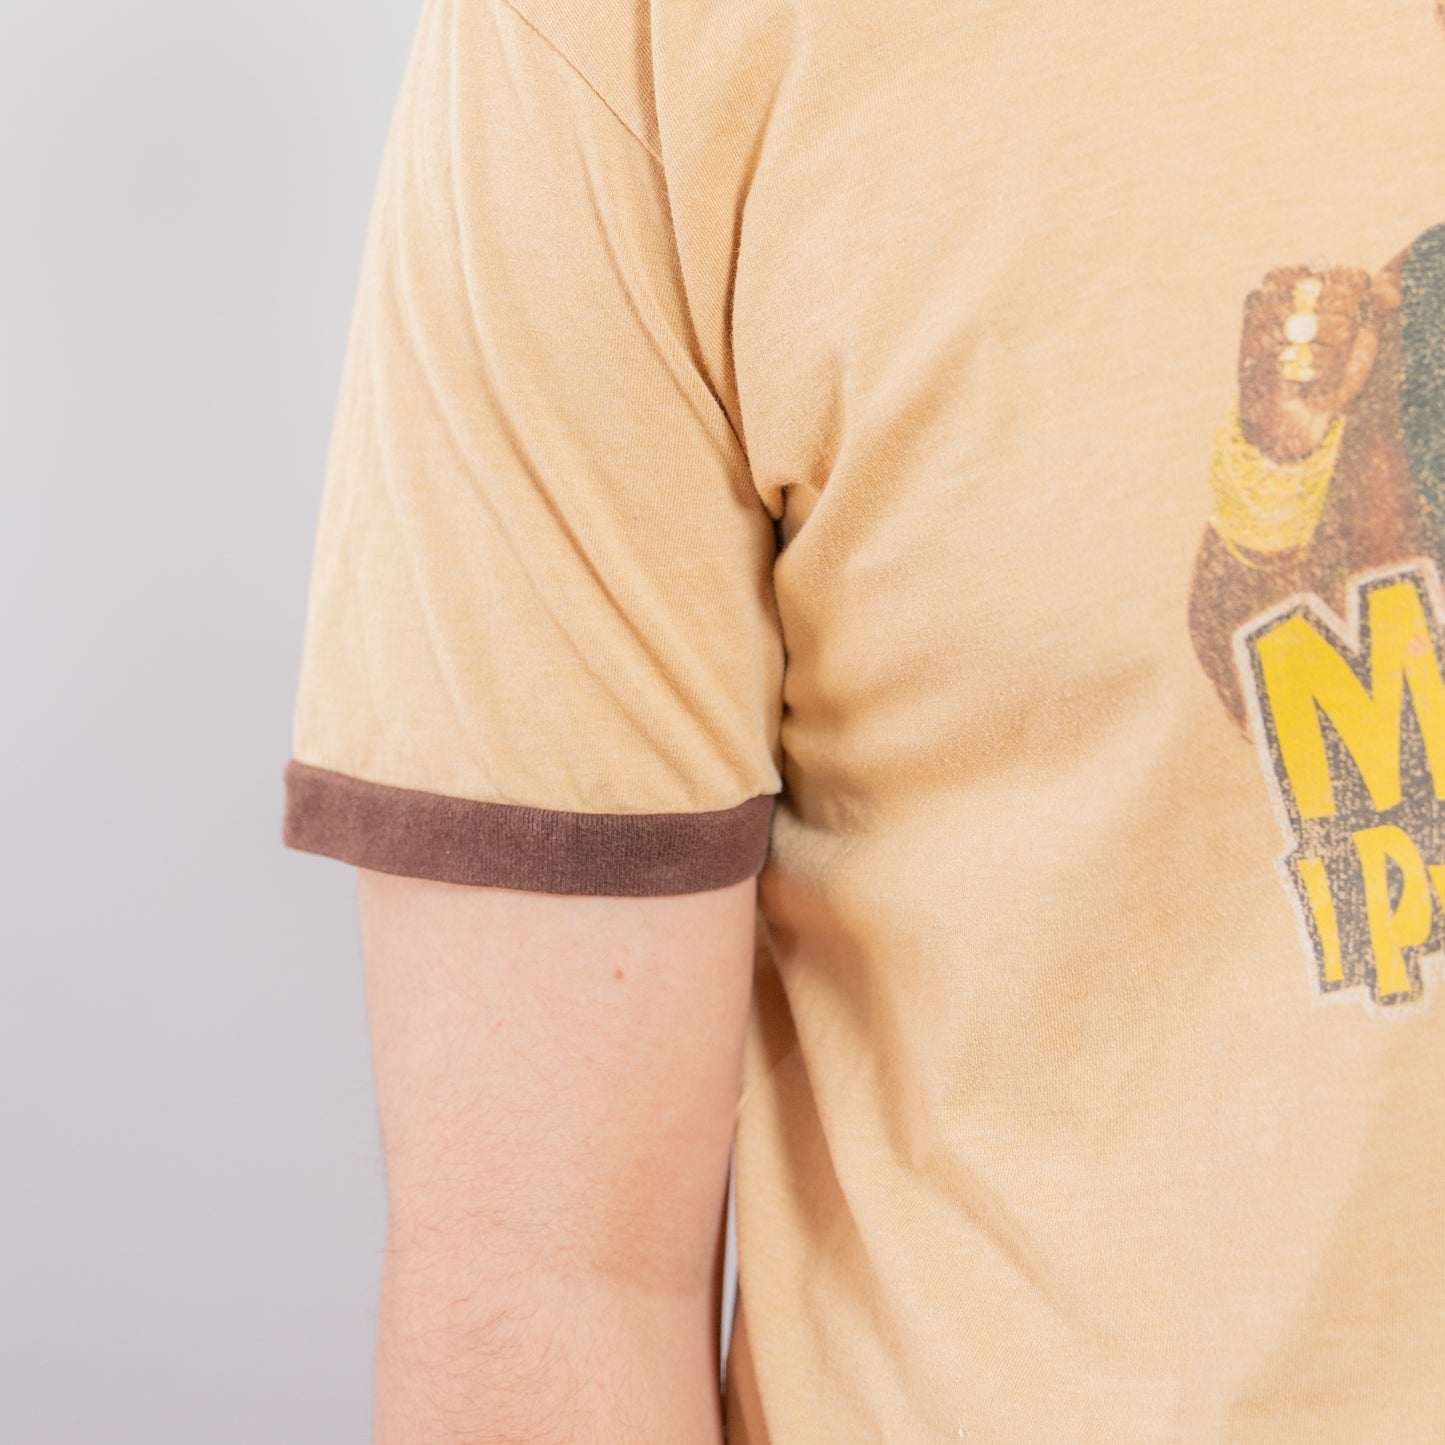 2004 Mr.T I Pity The Fool Ringer Tee